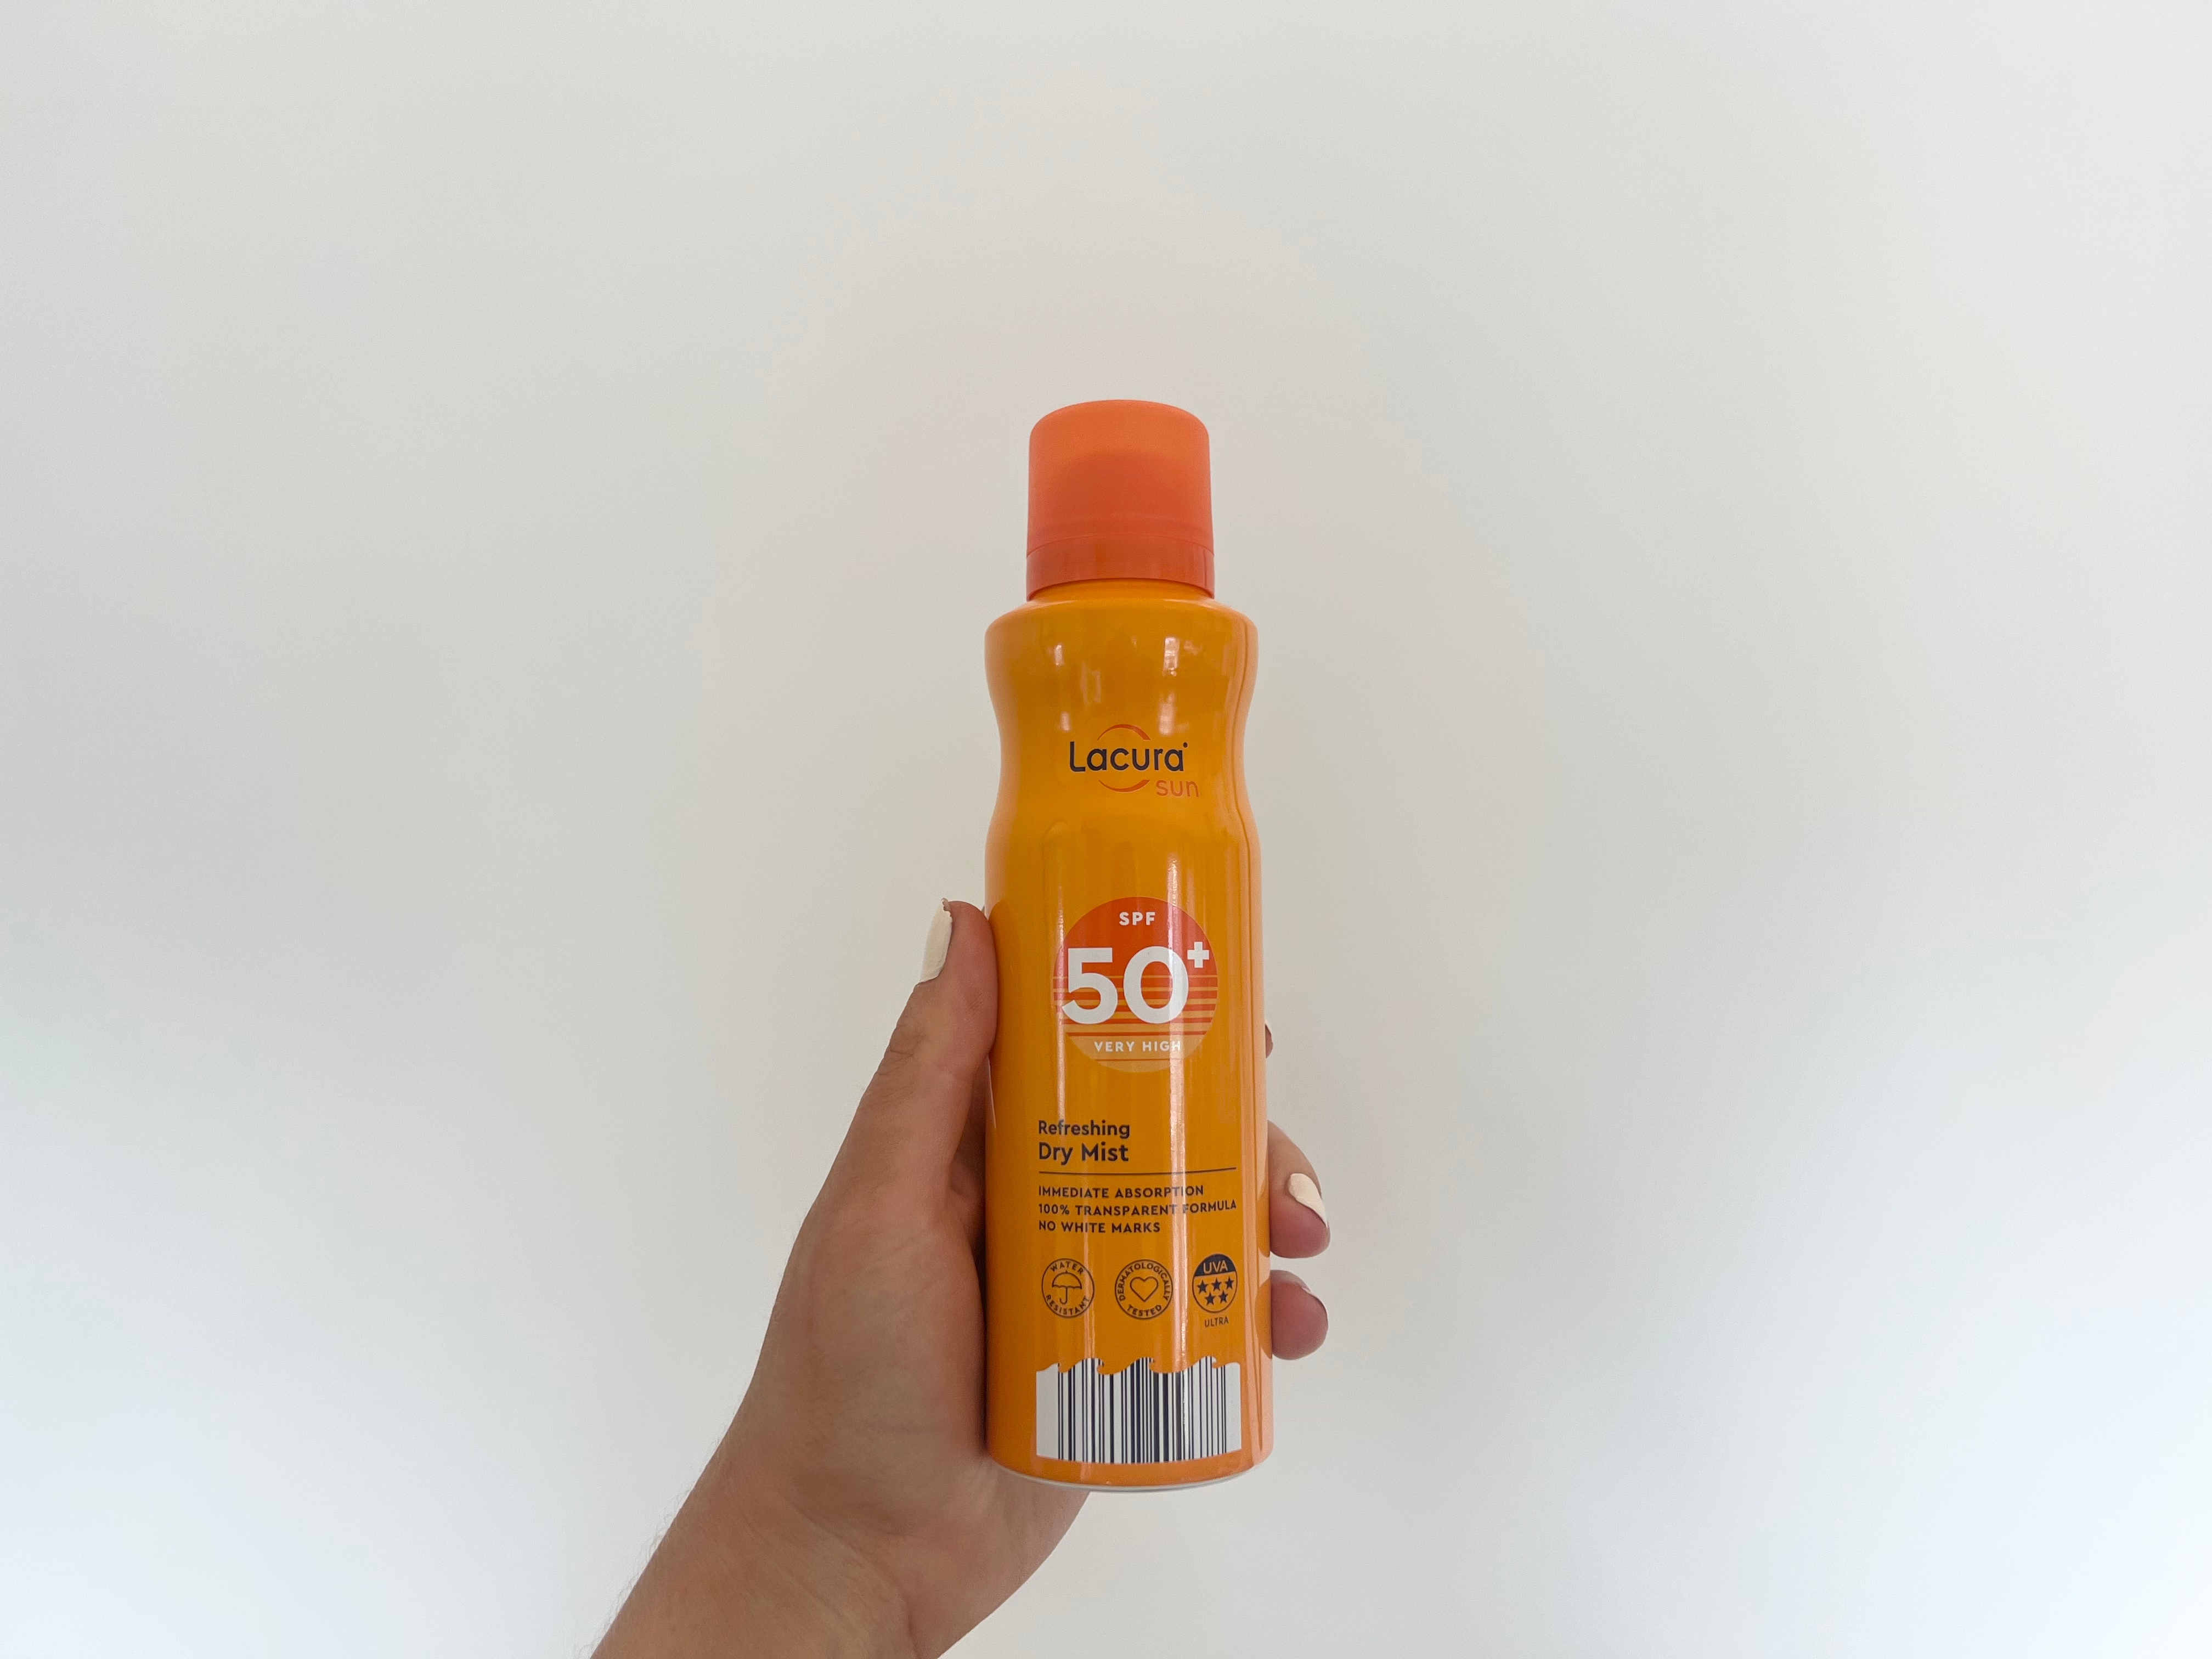 Lacura SPF 50+ refreshing dry mist review